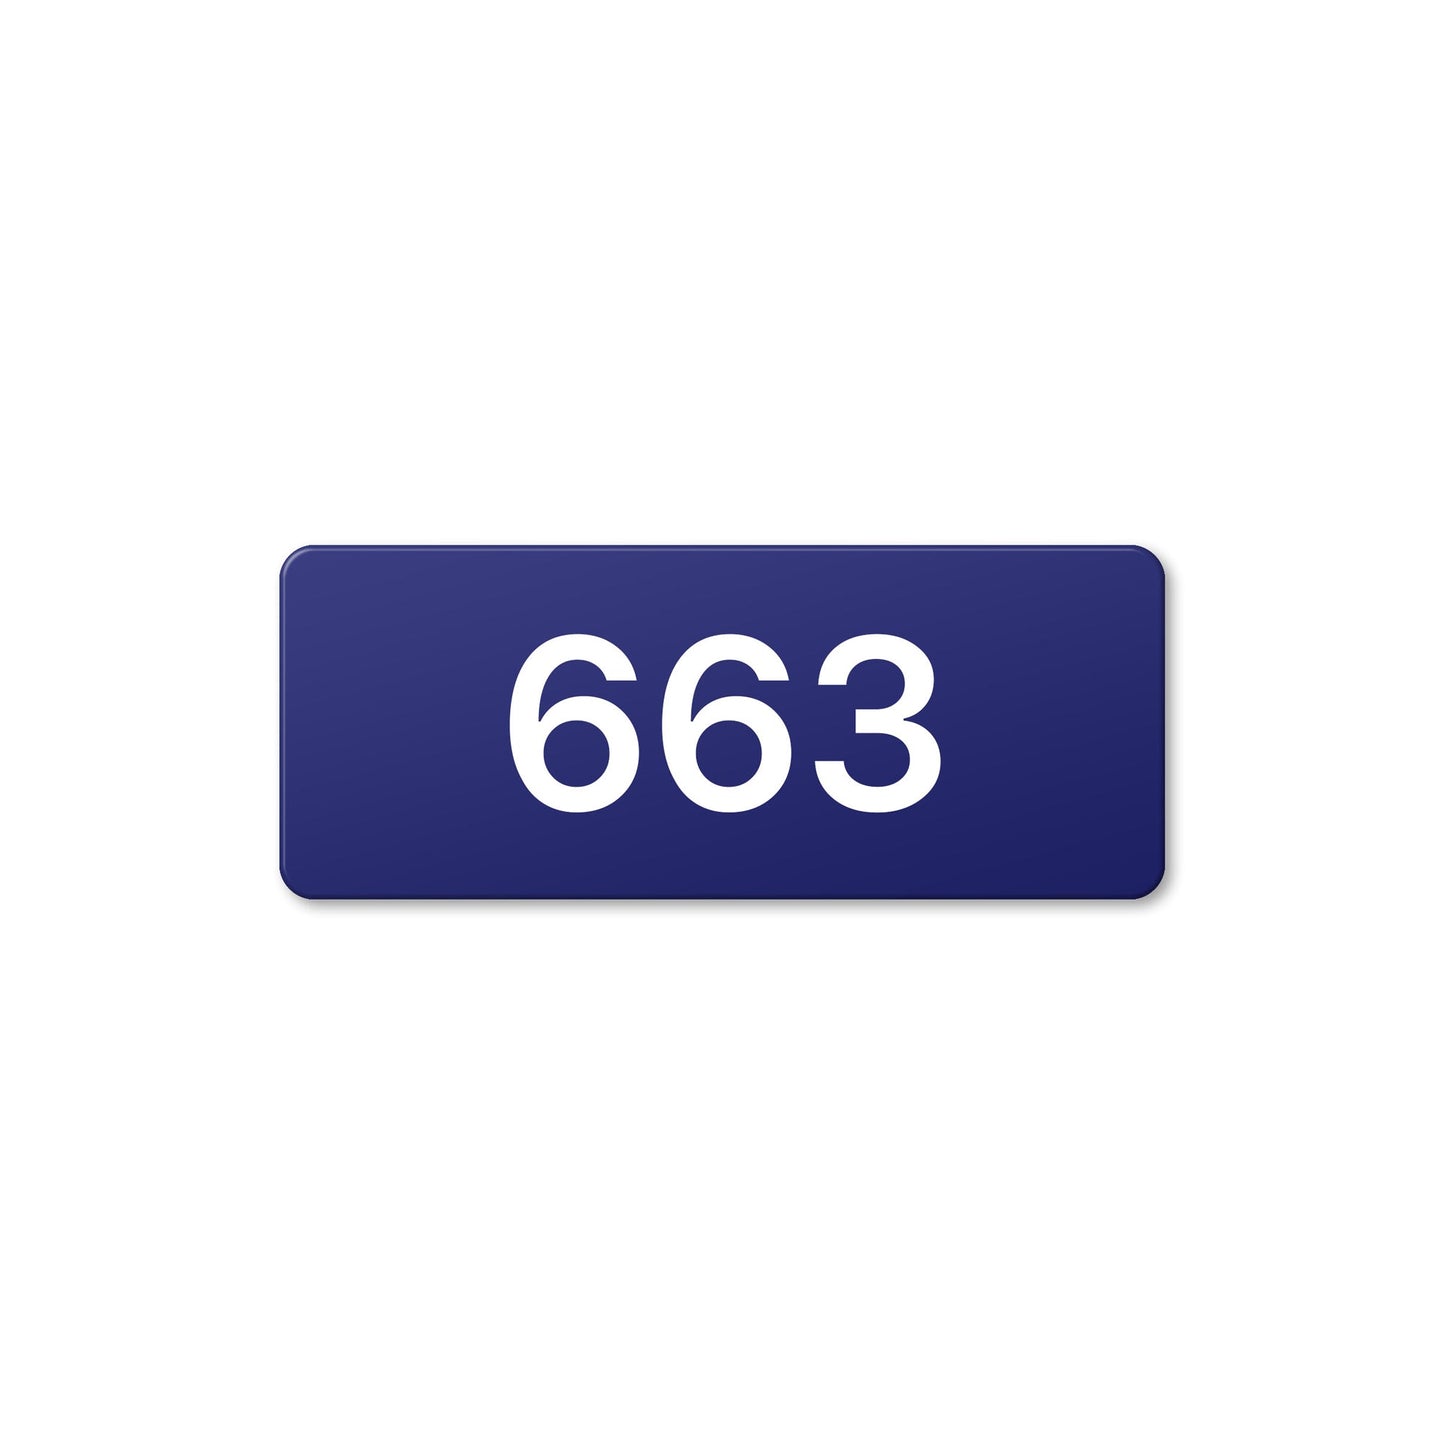 Numeral 663